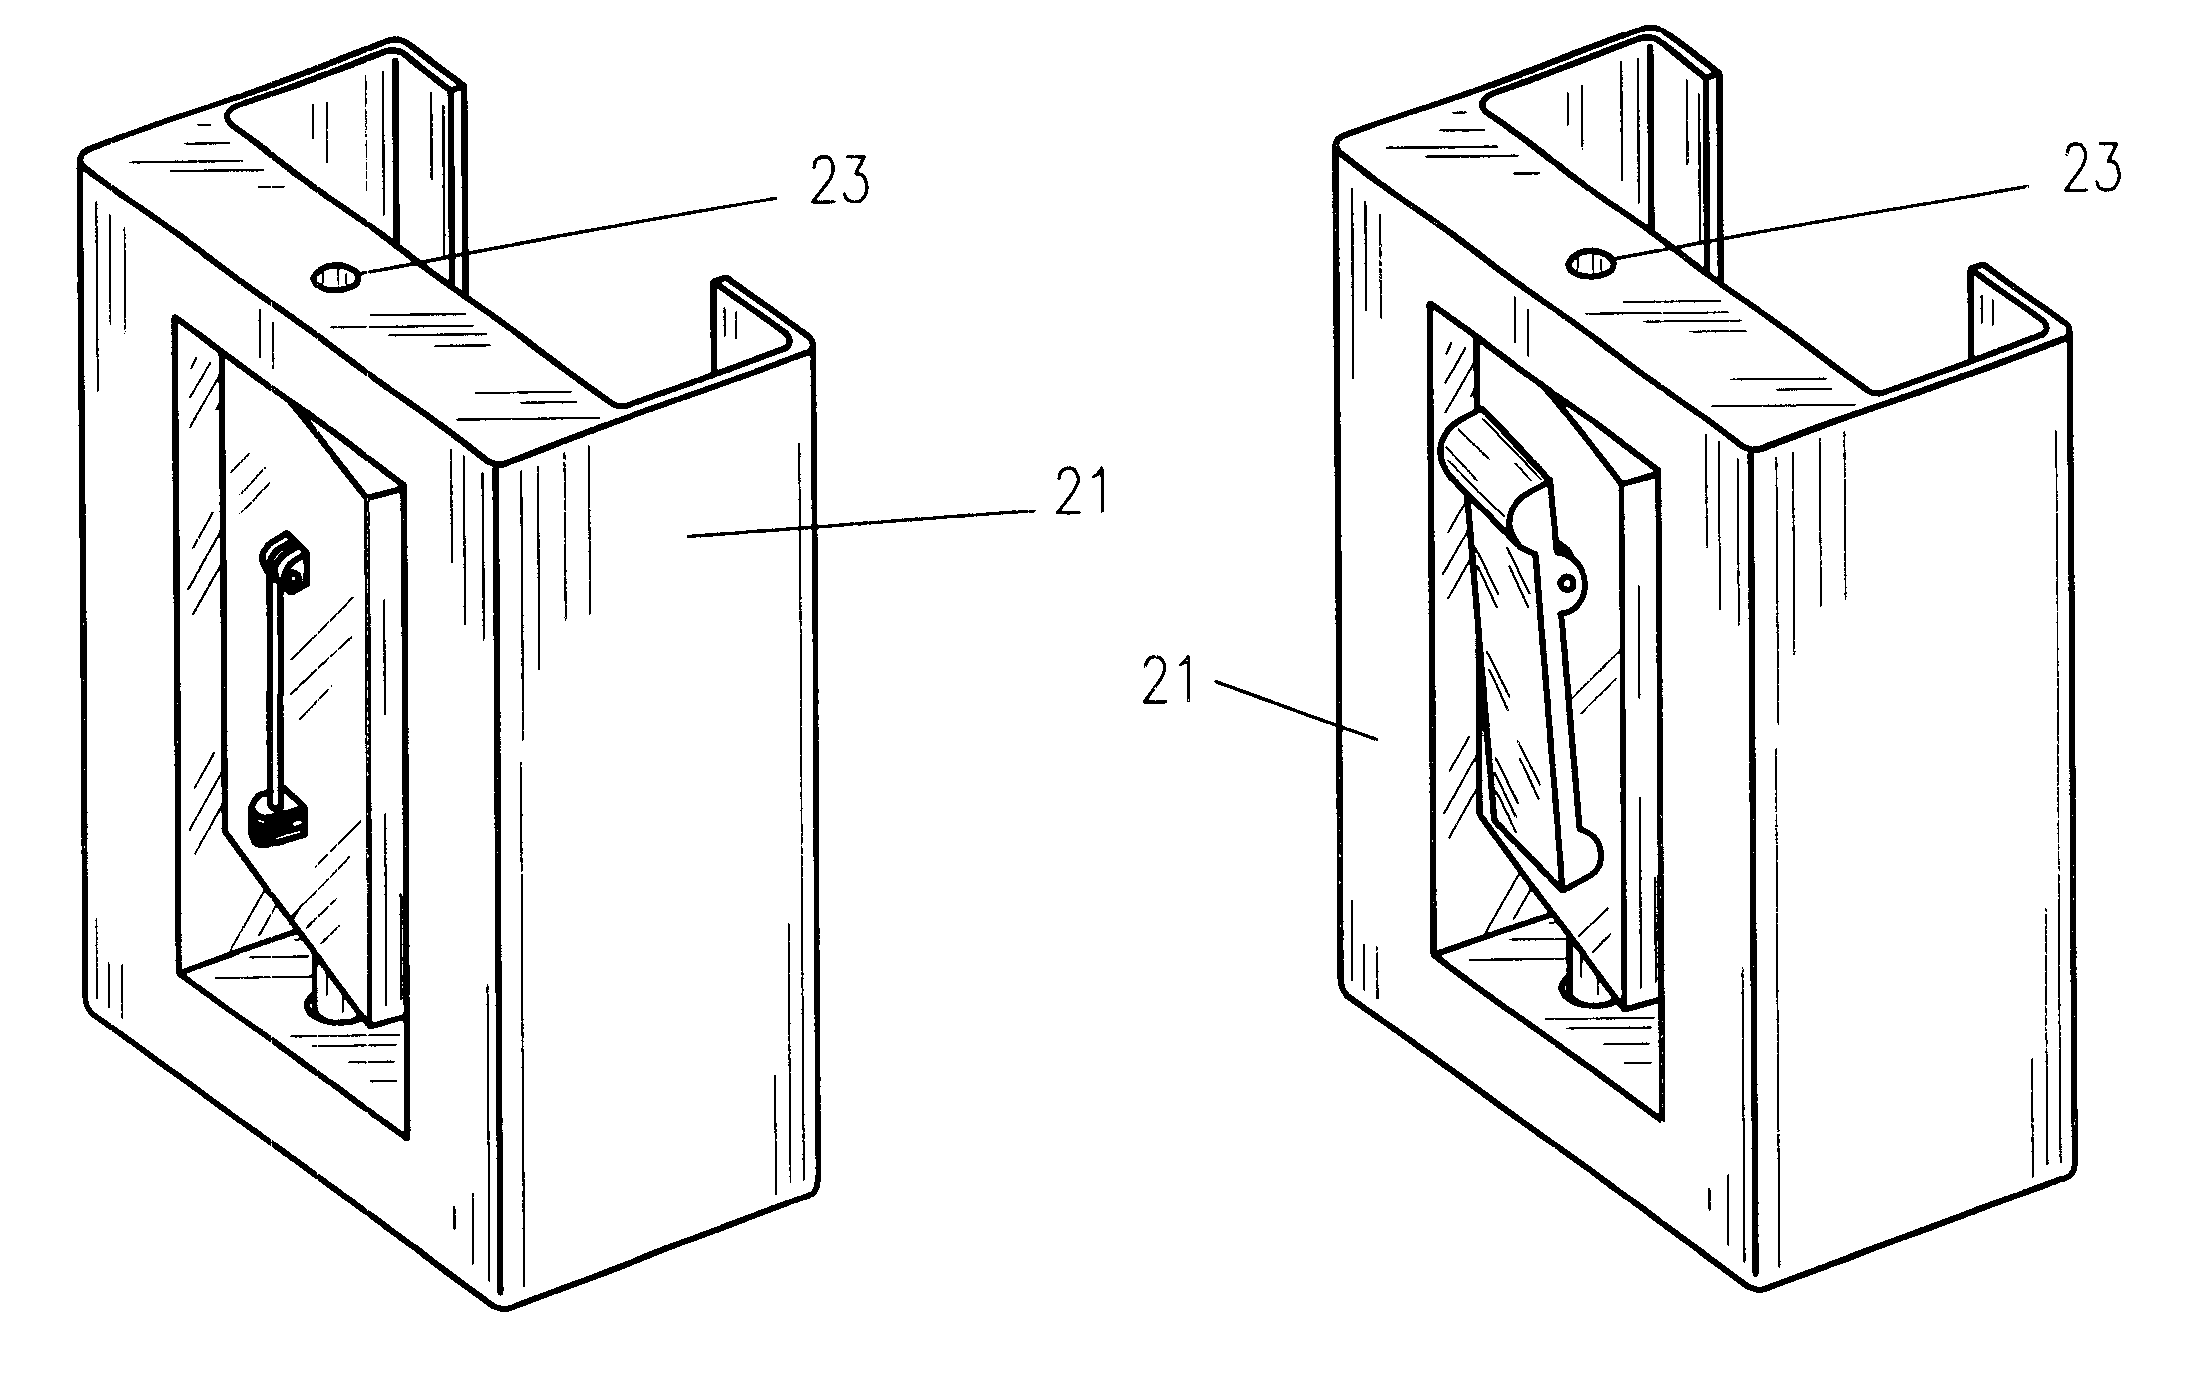 Securing device for personal pagers